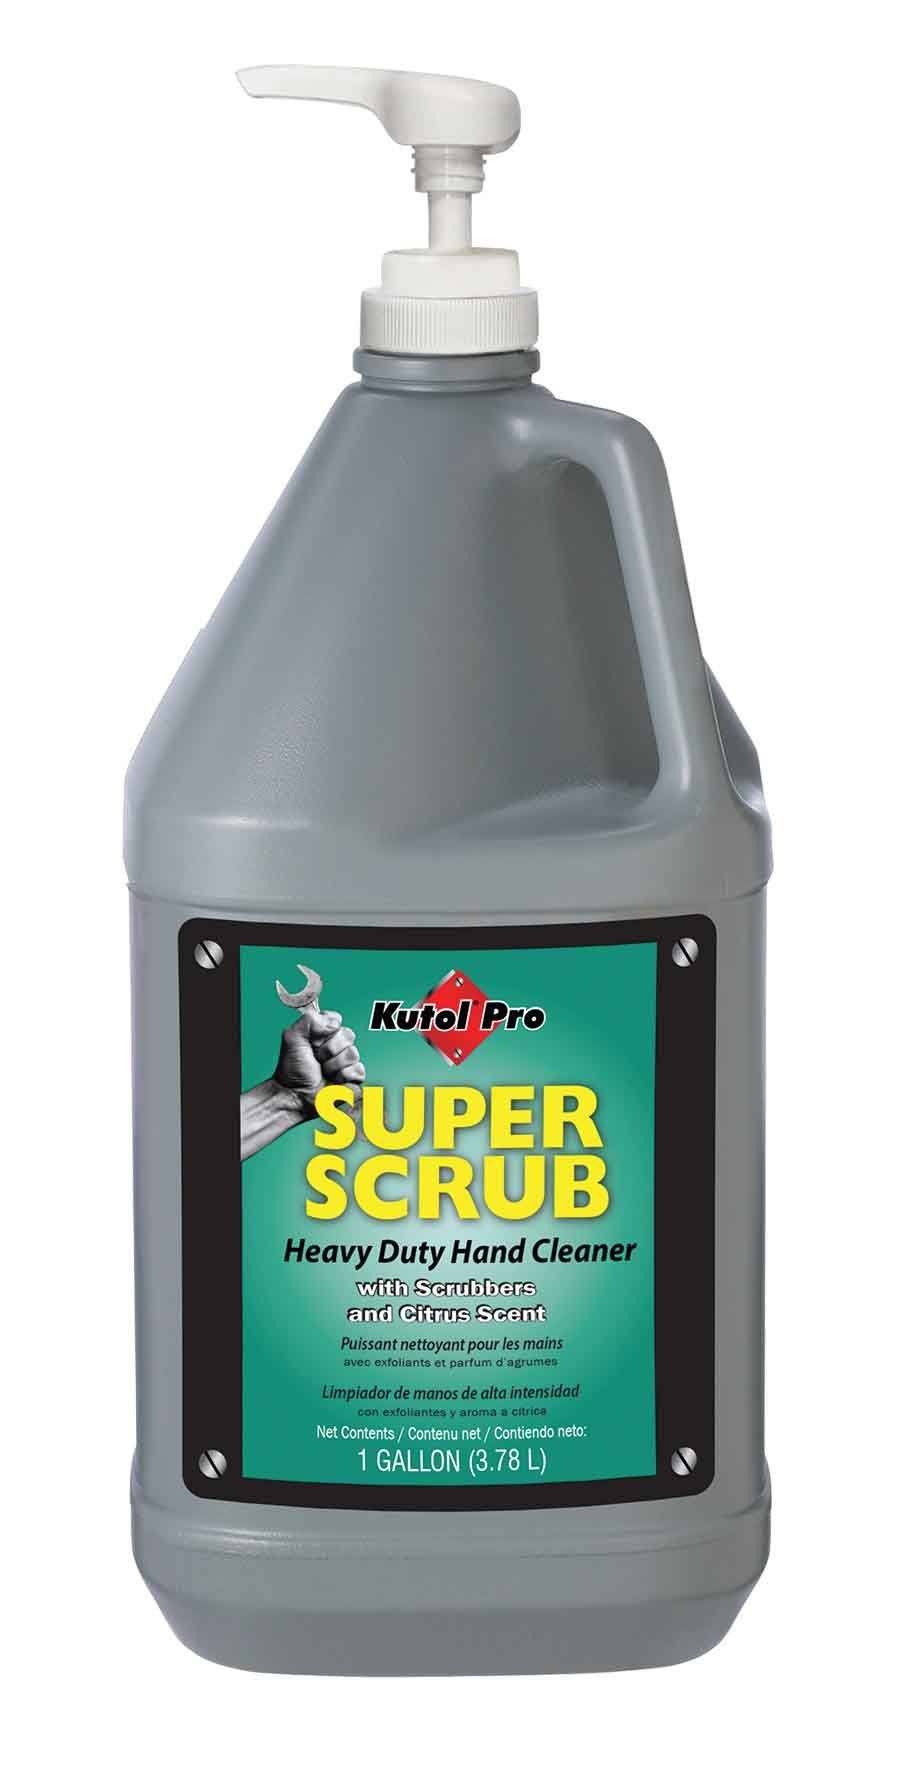 Super Scrub with Scrubbers Heavy Duty Hand Cleaner, One Gallon